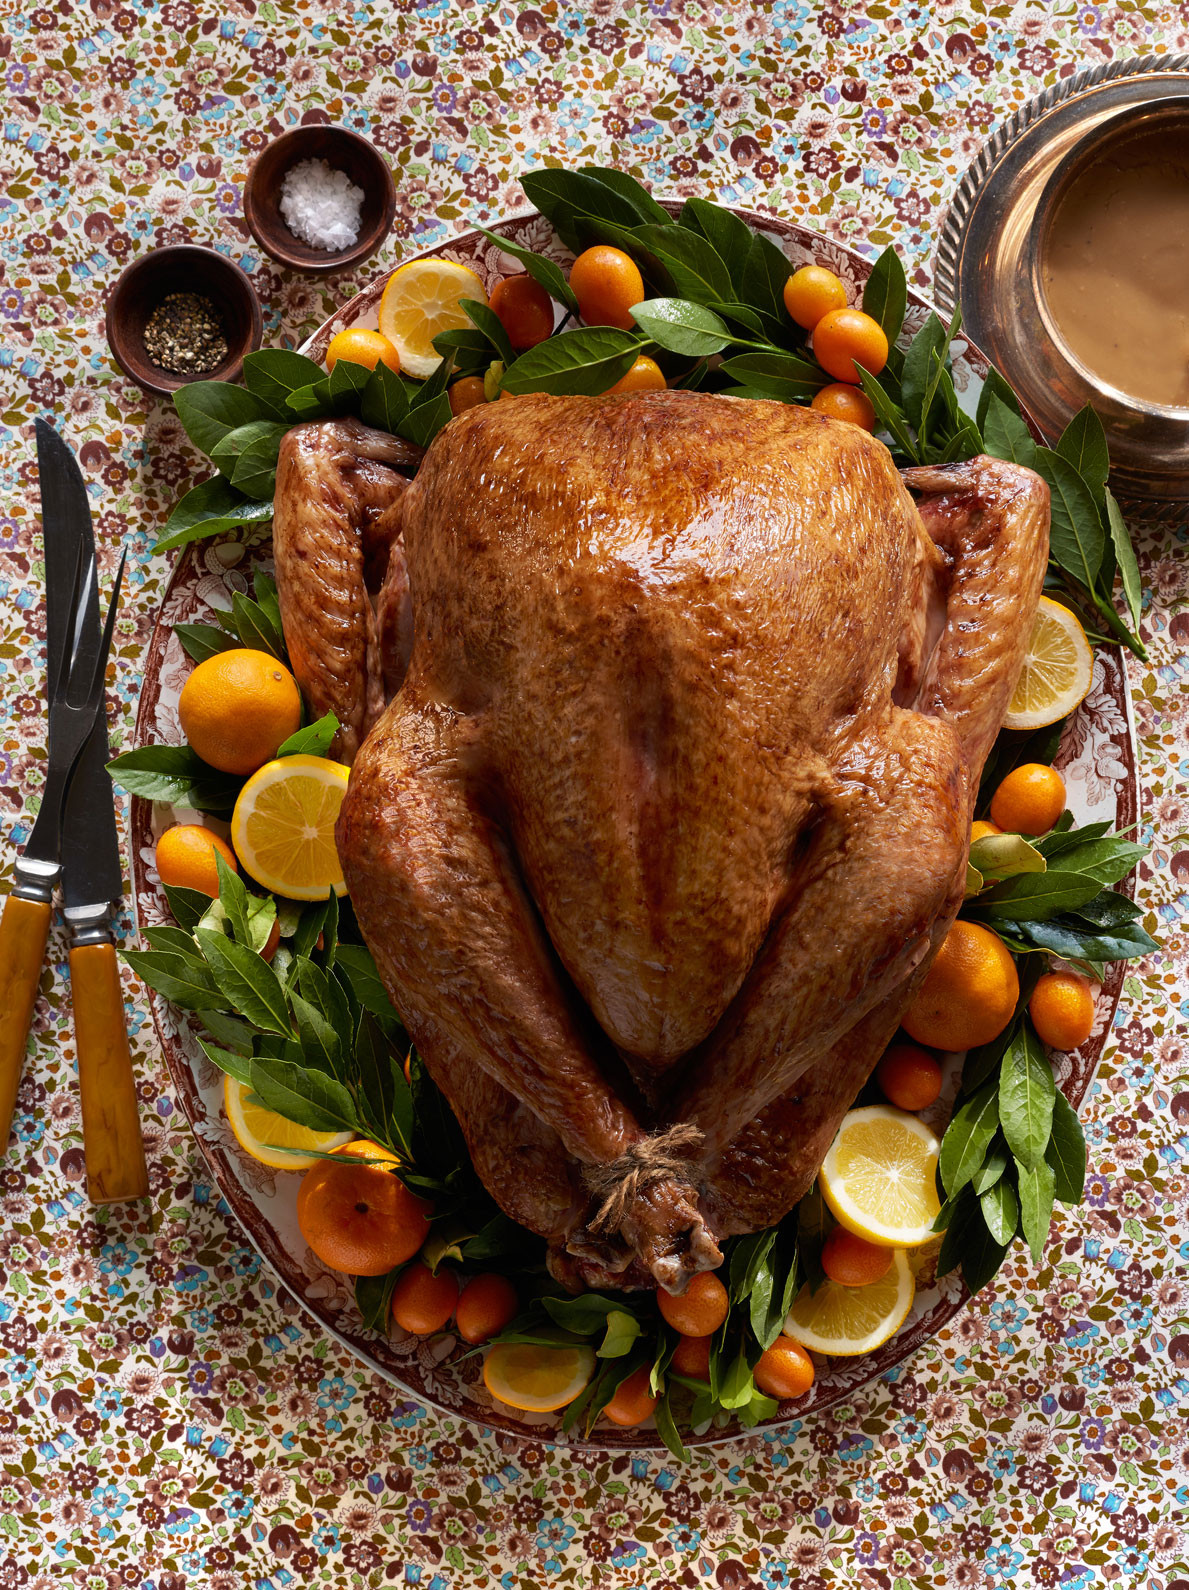 Turkey And Thanksgiving
 25 Best Thanksgiving Turkey Recipes How To Cook Turkey